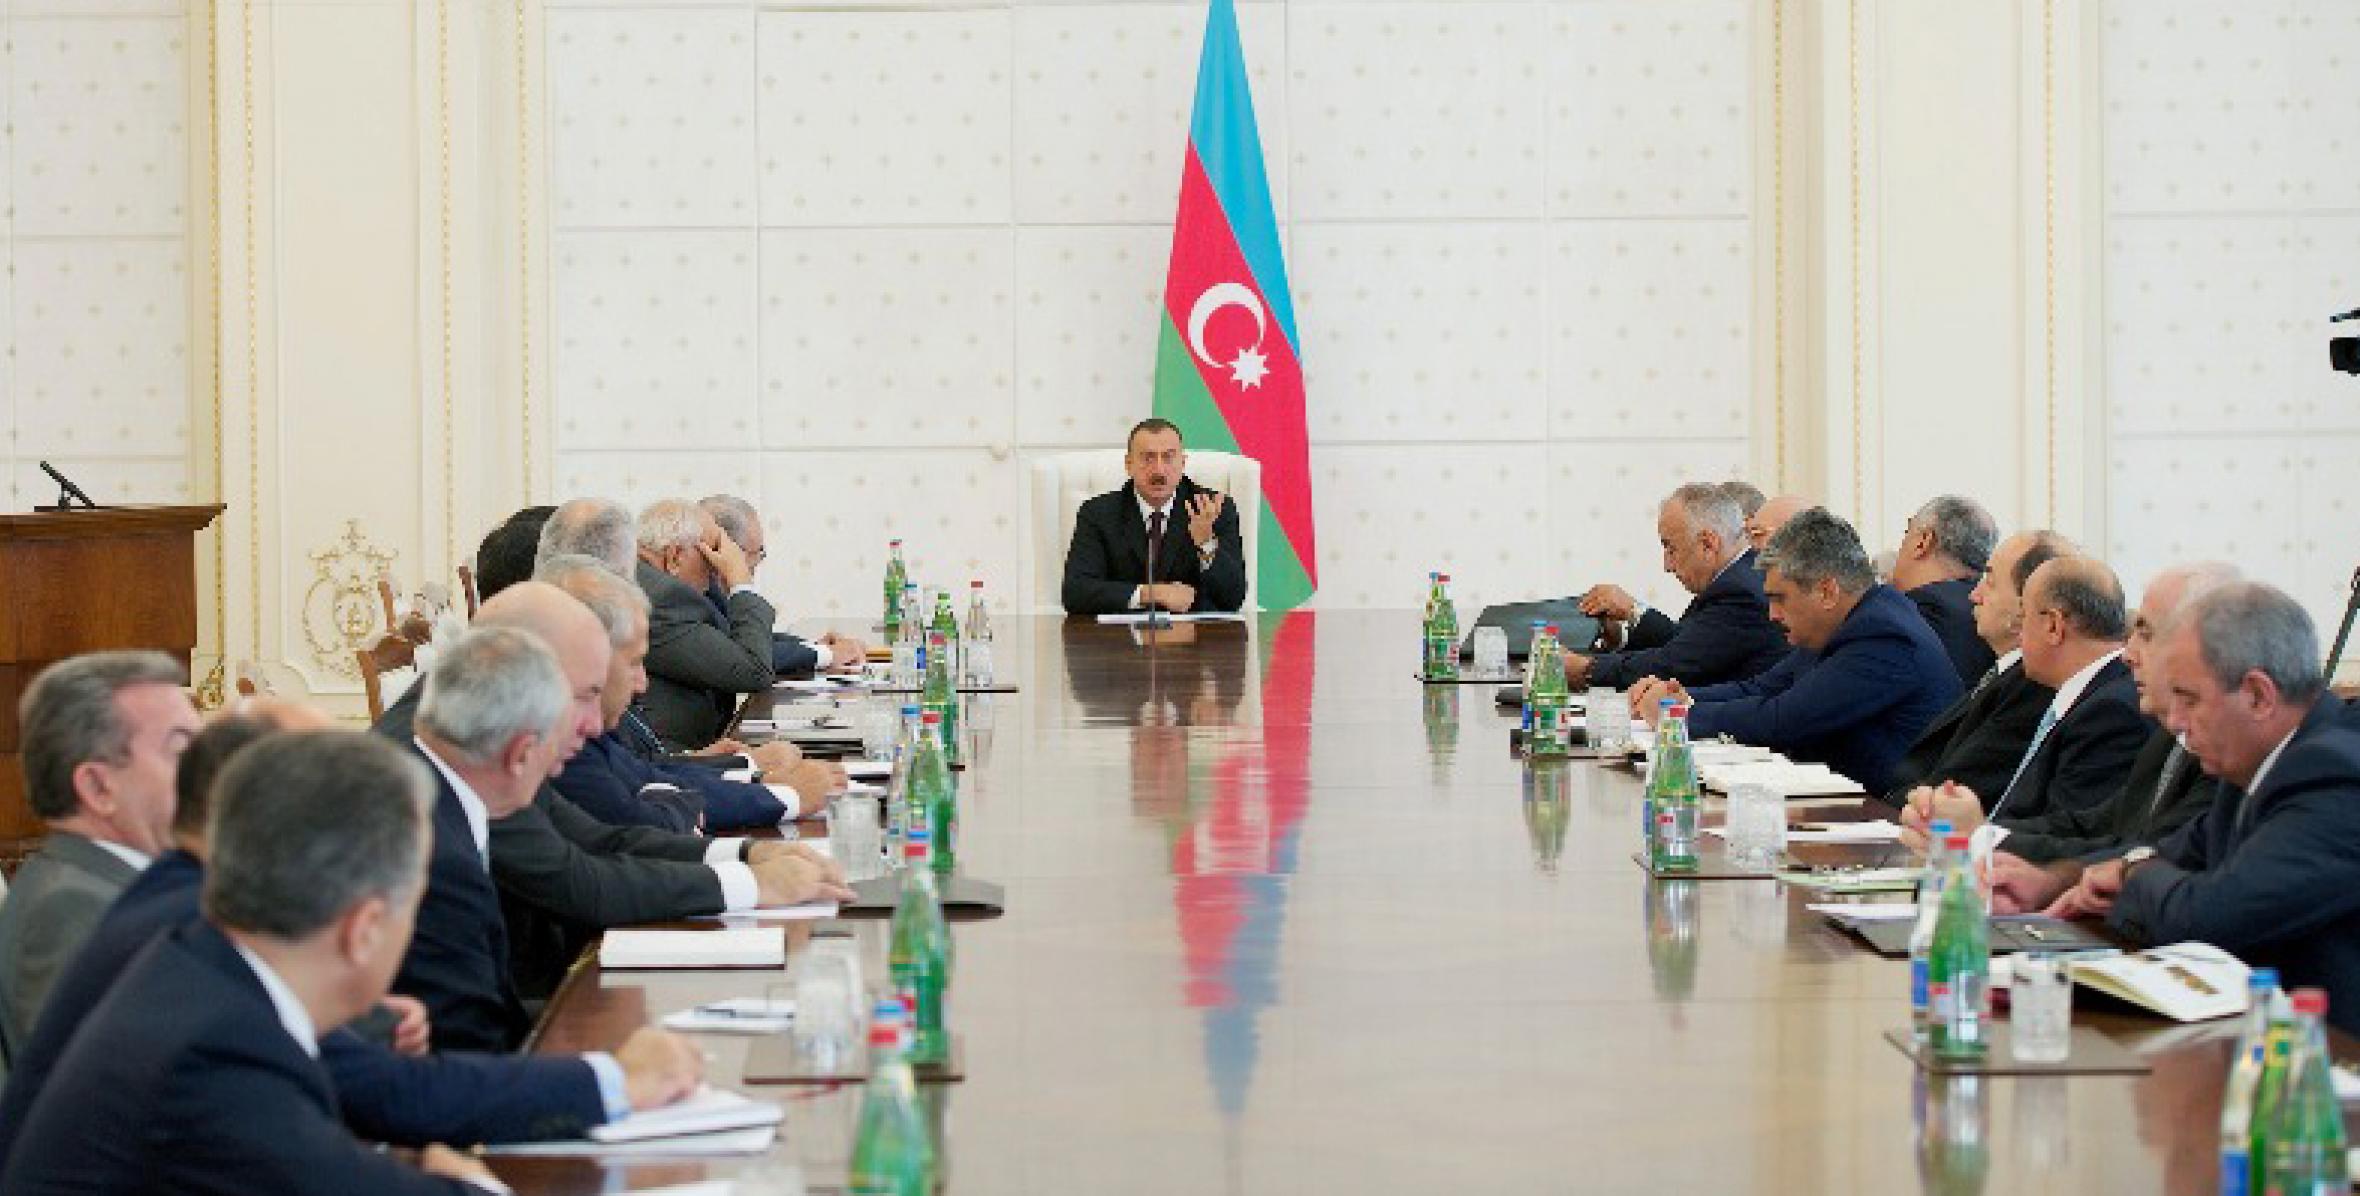 Closing speech by Ilham Aliyev at the Cabinet of Ministers